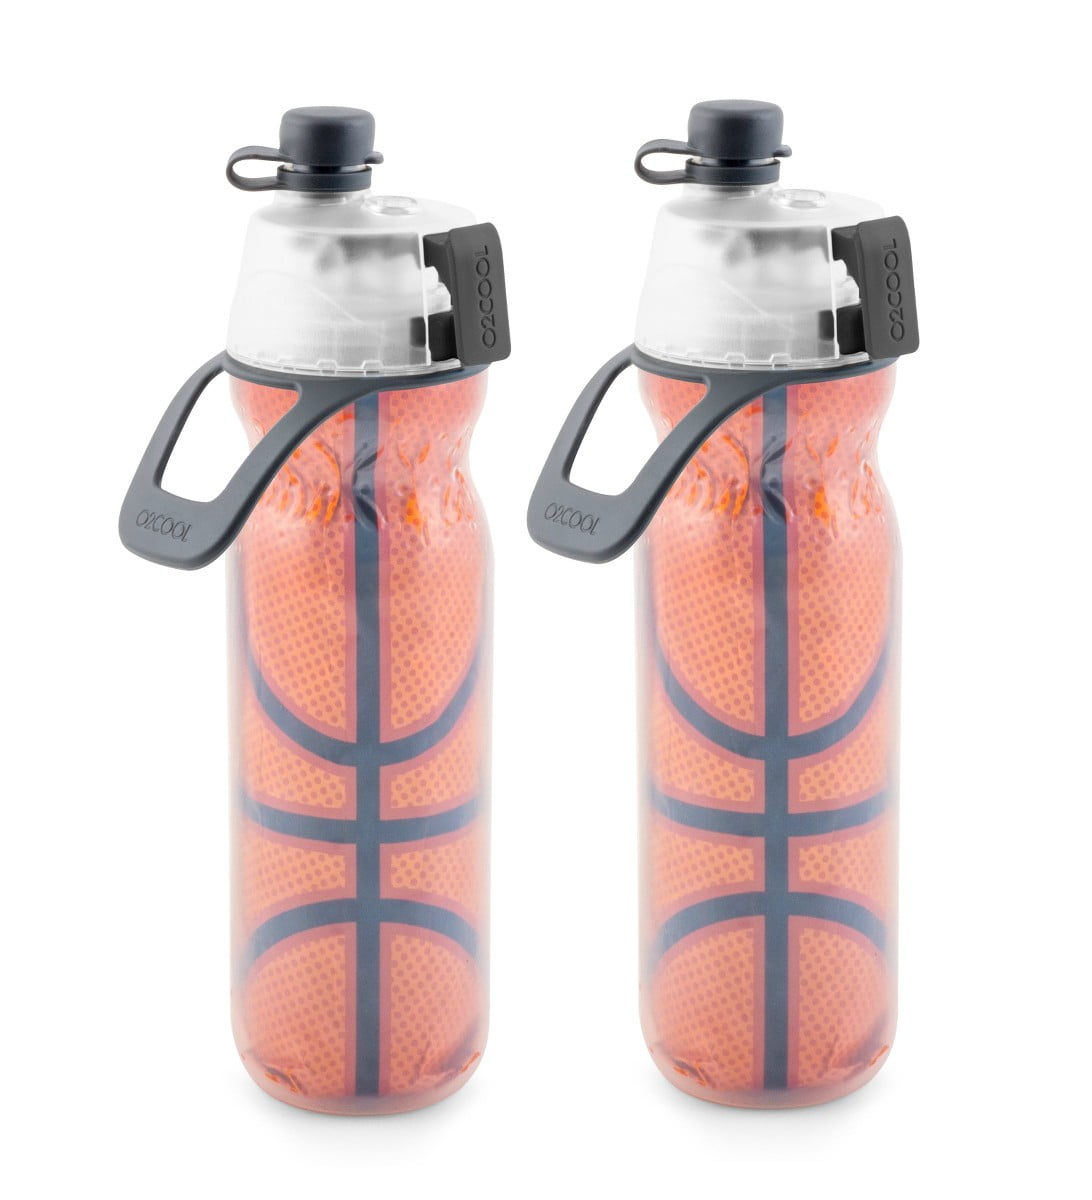 2 PACK O2COOL Insulated Mist N' Sip Misting Water Bottles Sport Series 